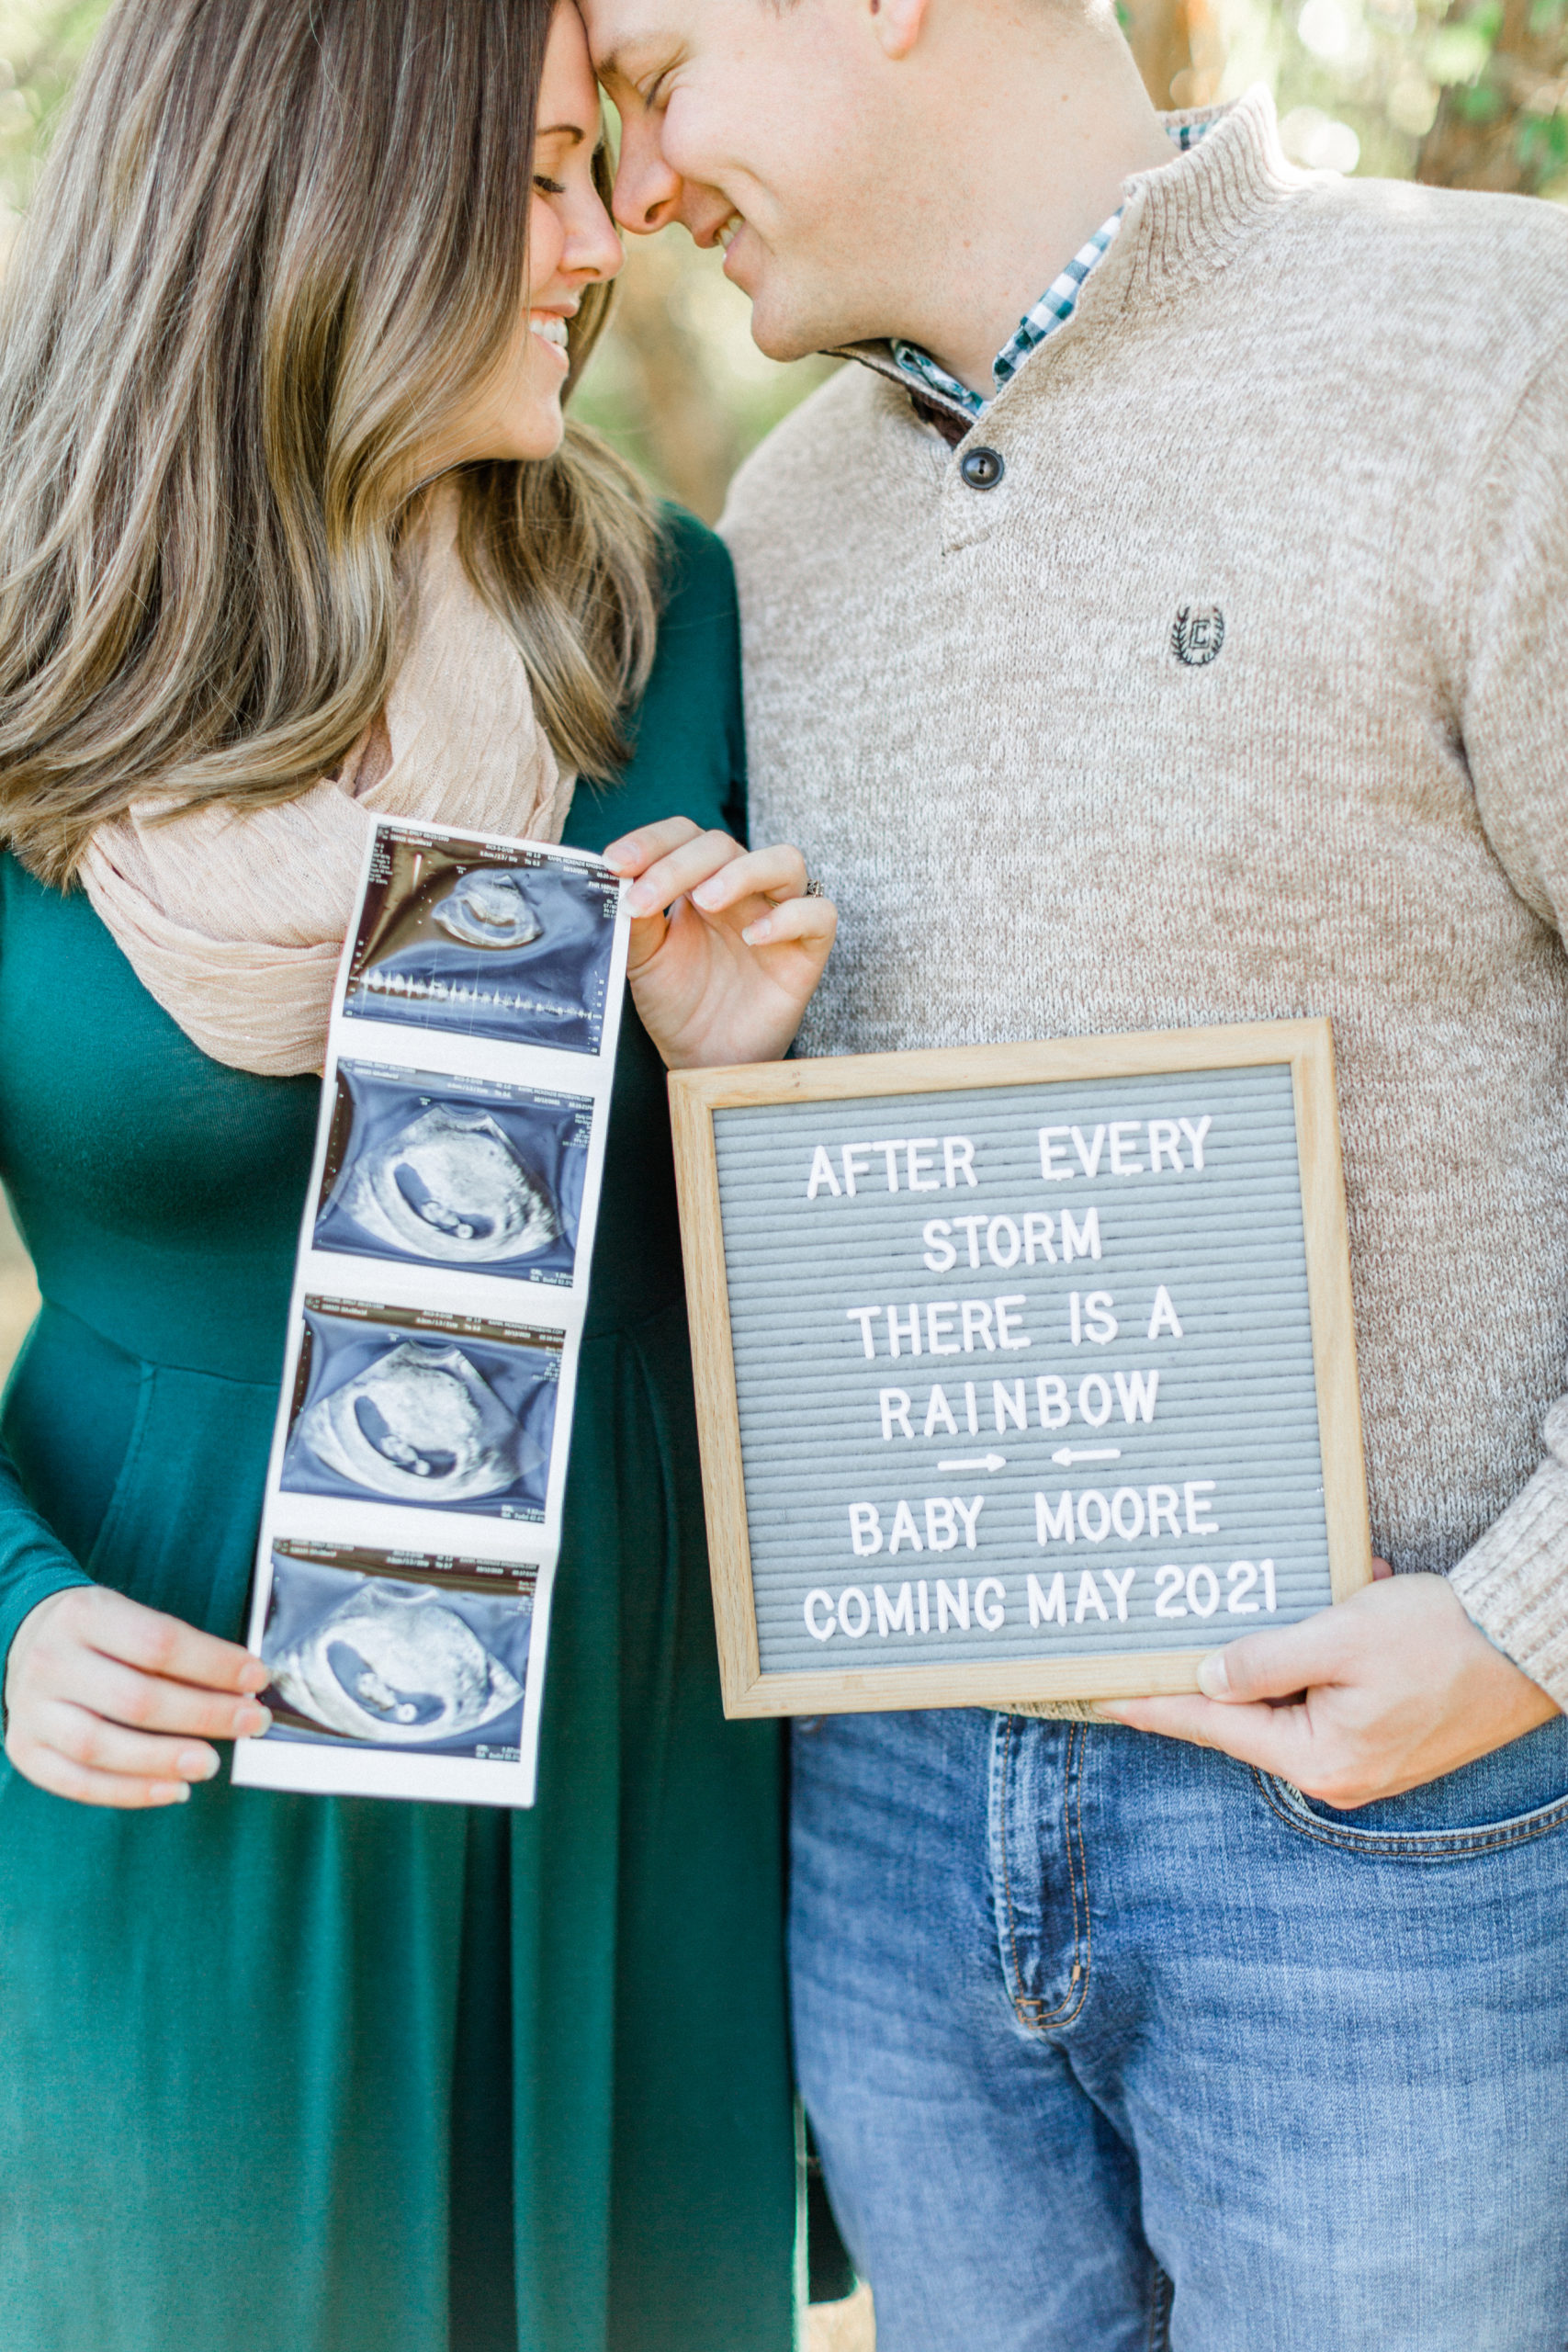 We're Pregnant! | Emily Moore | Private Photo Editor | We've been keeping a secret...we are pregnant! After 2 losses this past year, our rainbow baby is finally coming! Baby Moore is due May 2021, and we cannot wait to meet our sweet babe!